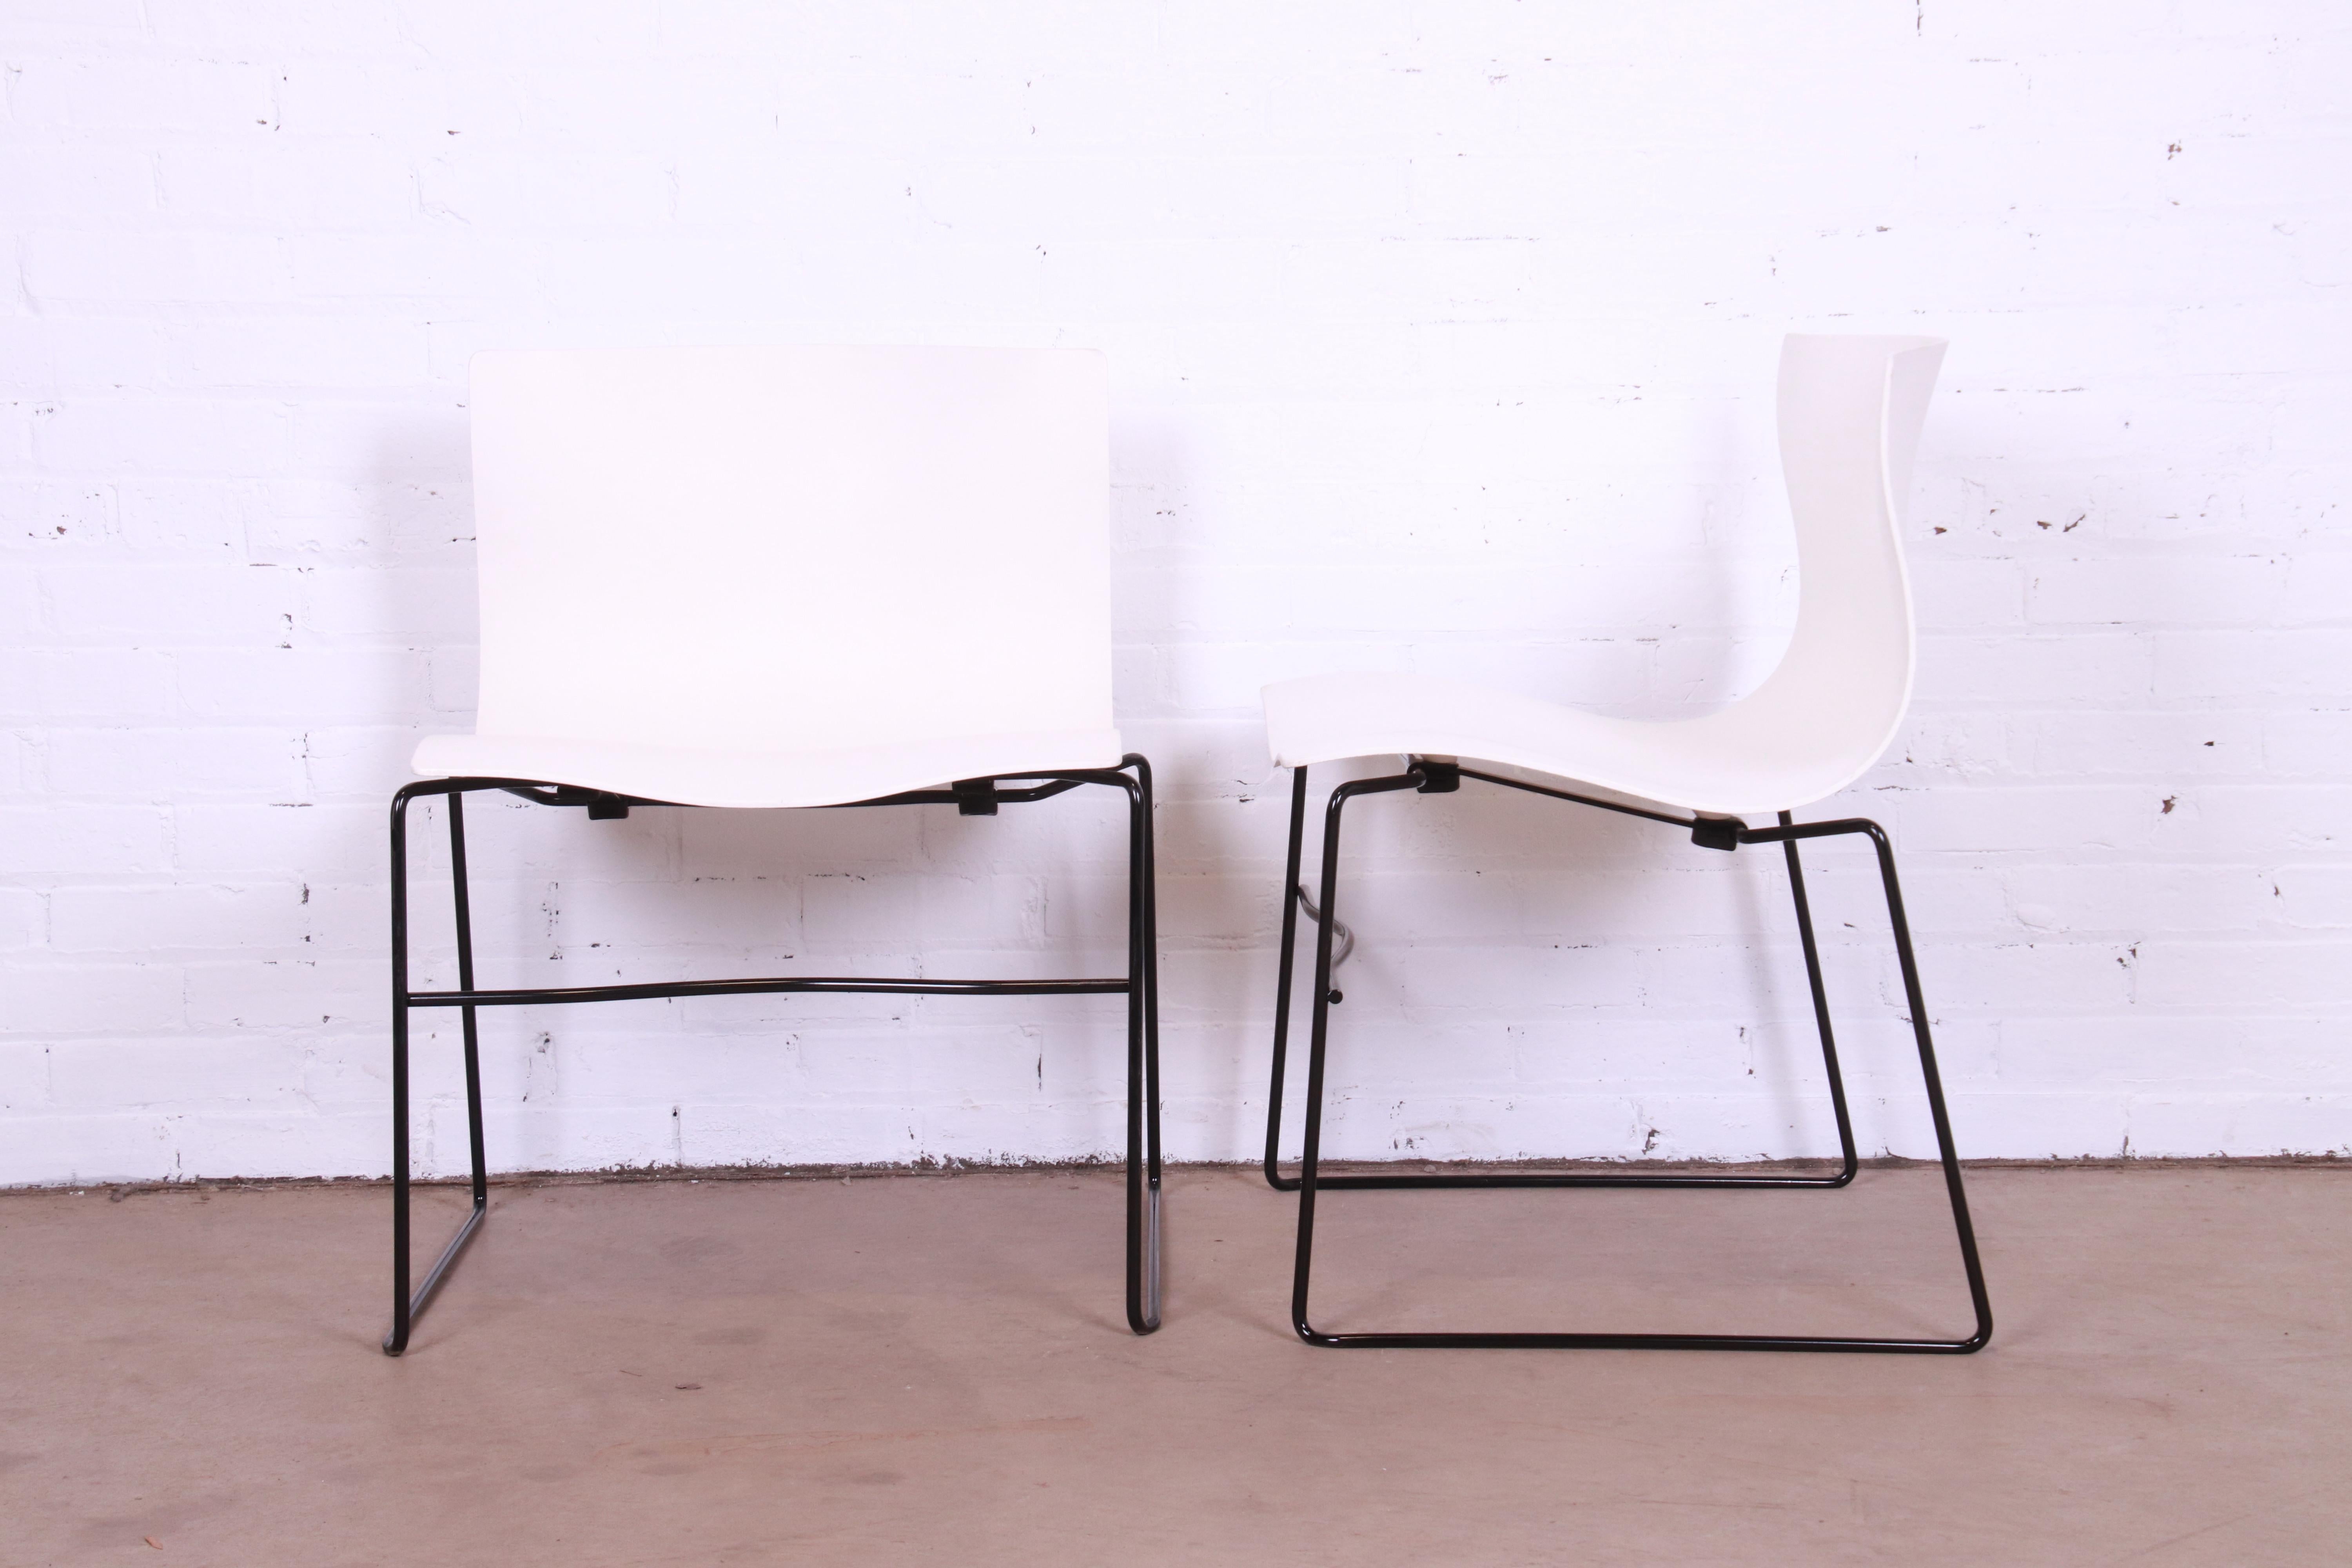 Steel Massimo Vignelli for Knoll Postmodern Handkerchief Chair, 7 Available For Sale